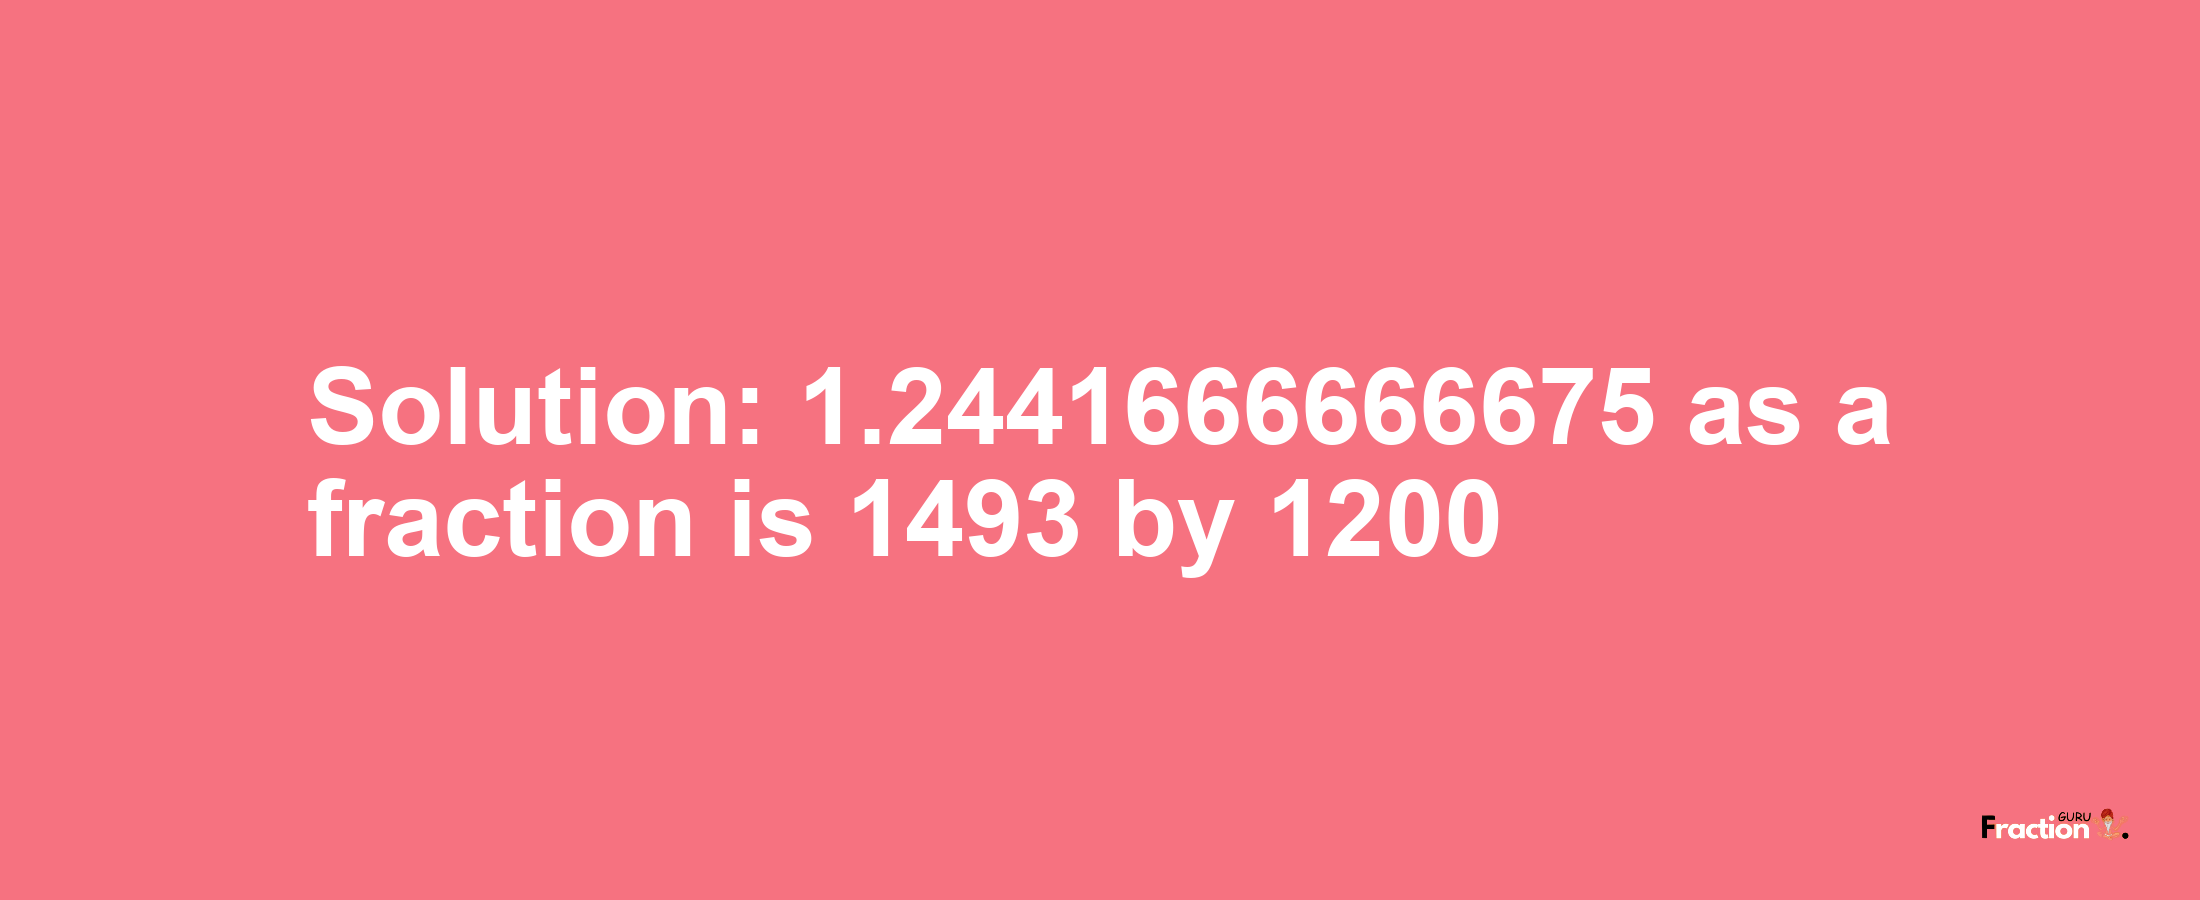 Solution:1.2441666666675 as a fraction is 1493/1200